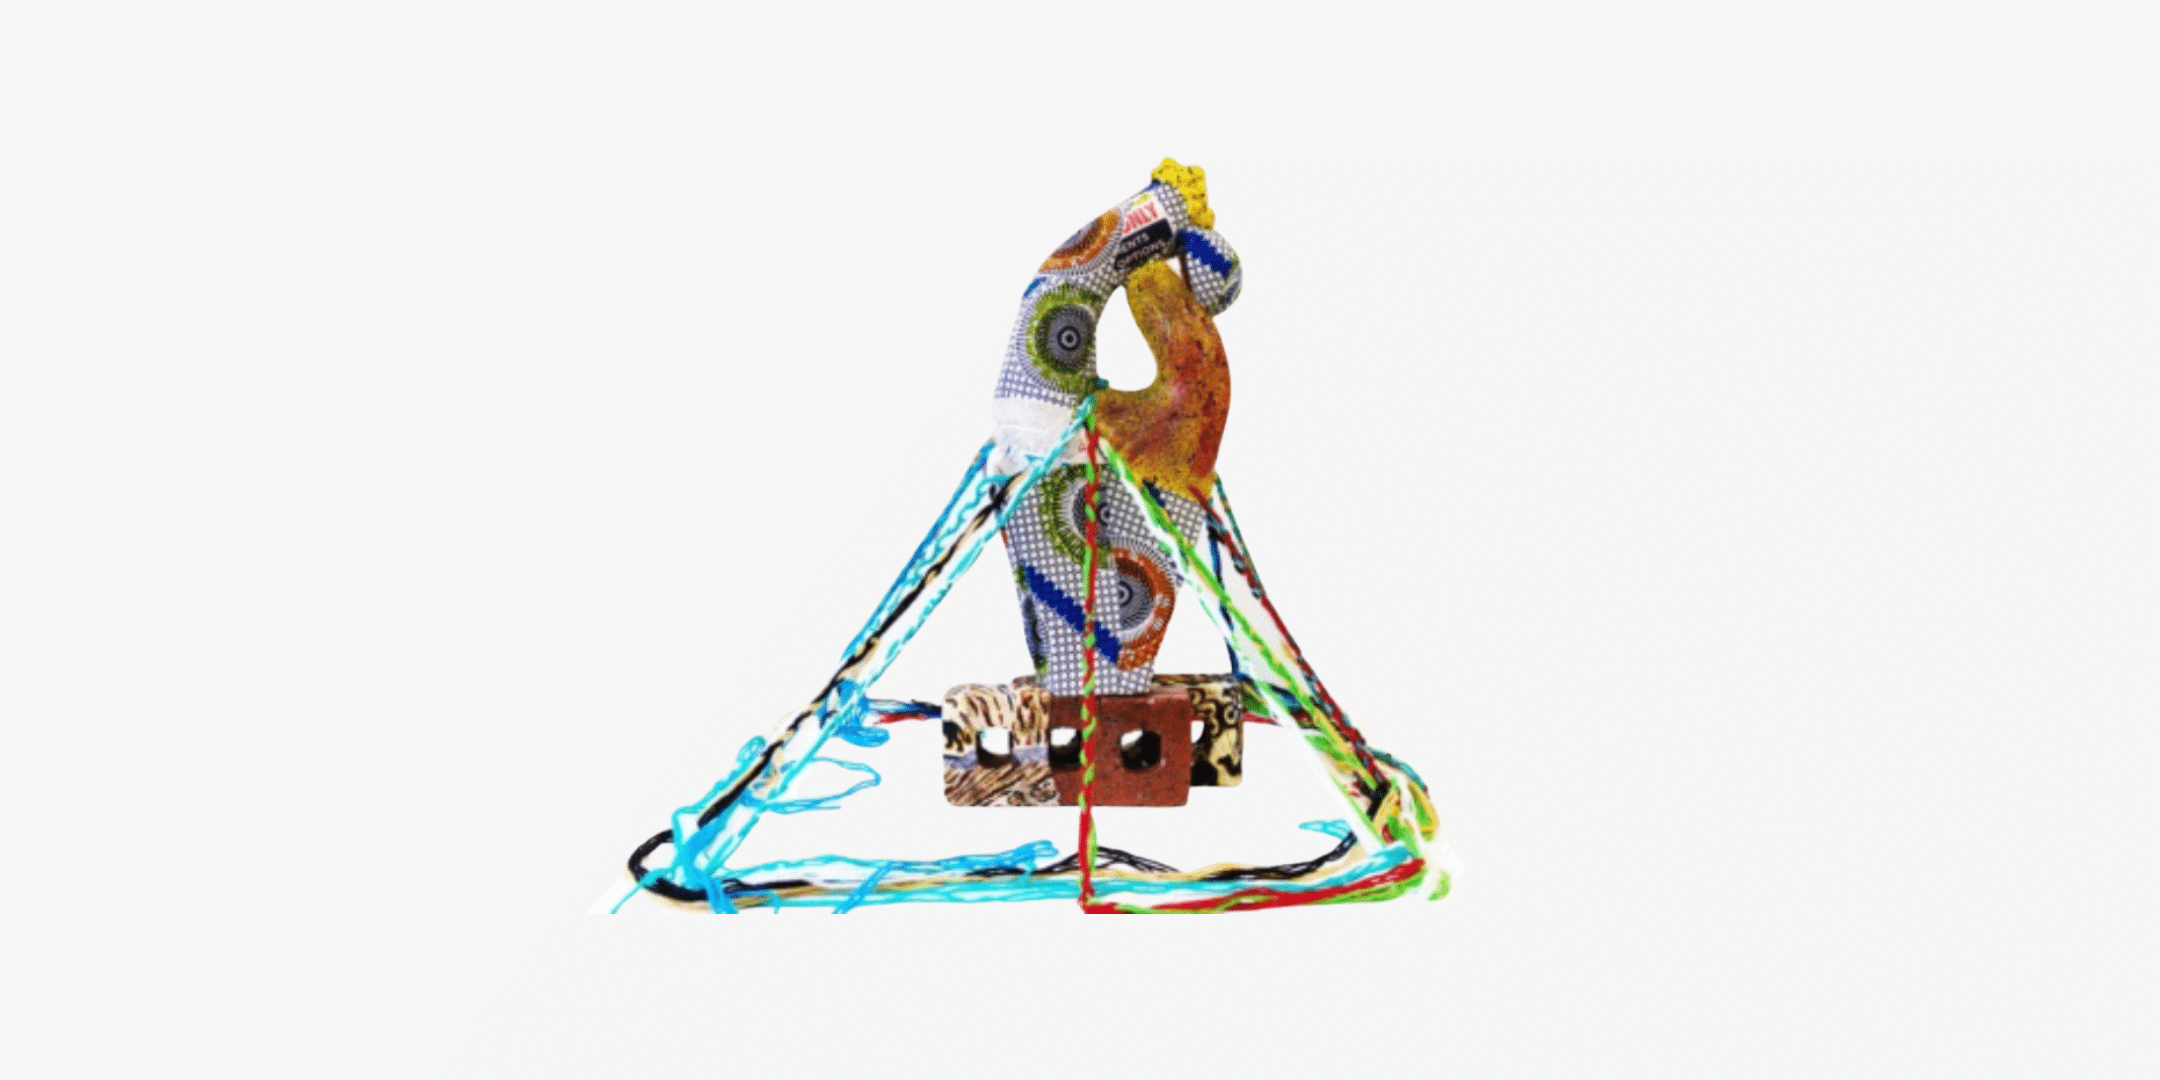 Image of colorful sculpture made with multiple mediums.